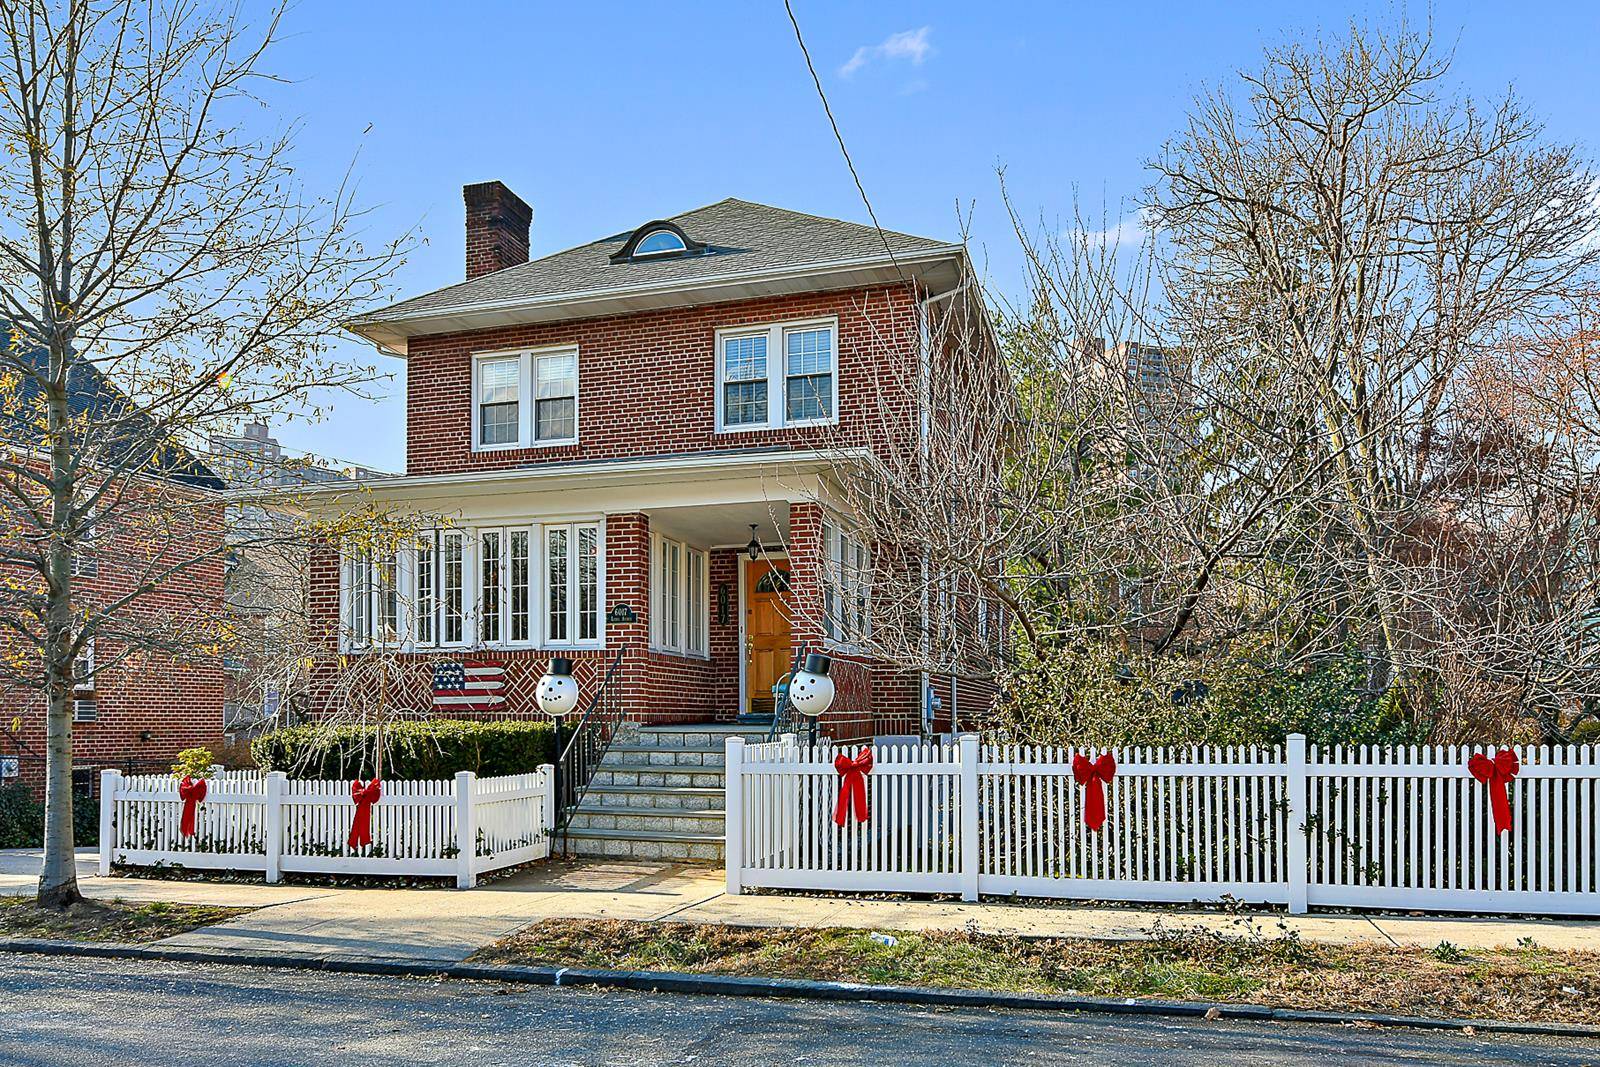 NORTH RIVERDALE DETACHED BRICK HOME Stately 1930 North Riverdale detached brick home with spectacular private outdoor oasis.